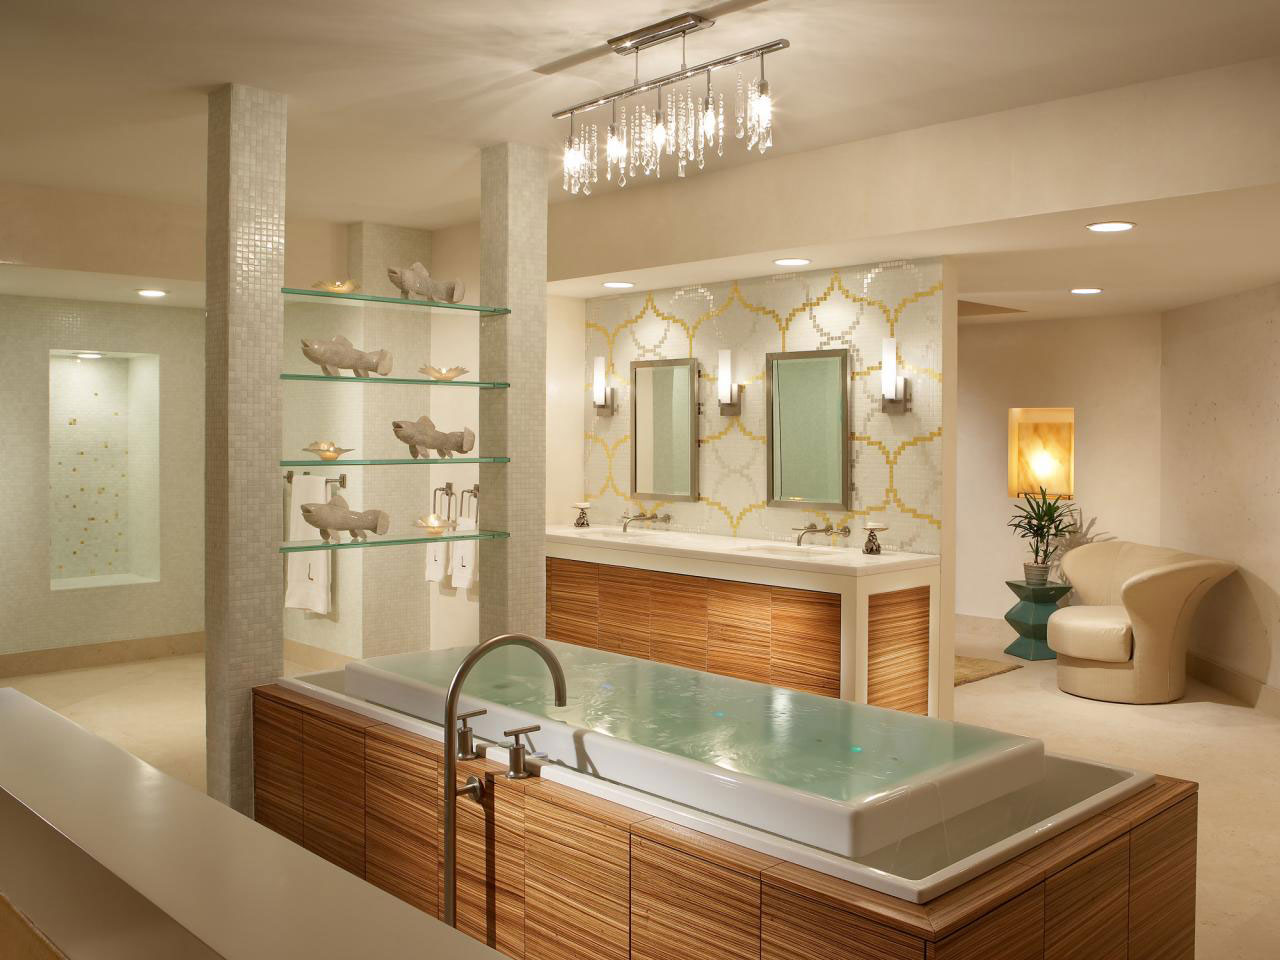 Bathroom Lighting Modern Extraordinary Bathroom Lighting Fixtures In Modern Bathtub Completed With Bathtub And Double Sinks Coupled By Mirror And Furnished With Glass Cabinet Bathroom The Greatnesses Of Bathroom Lighting Fixtures